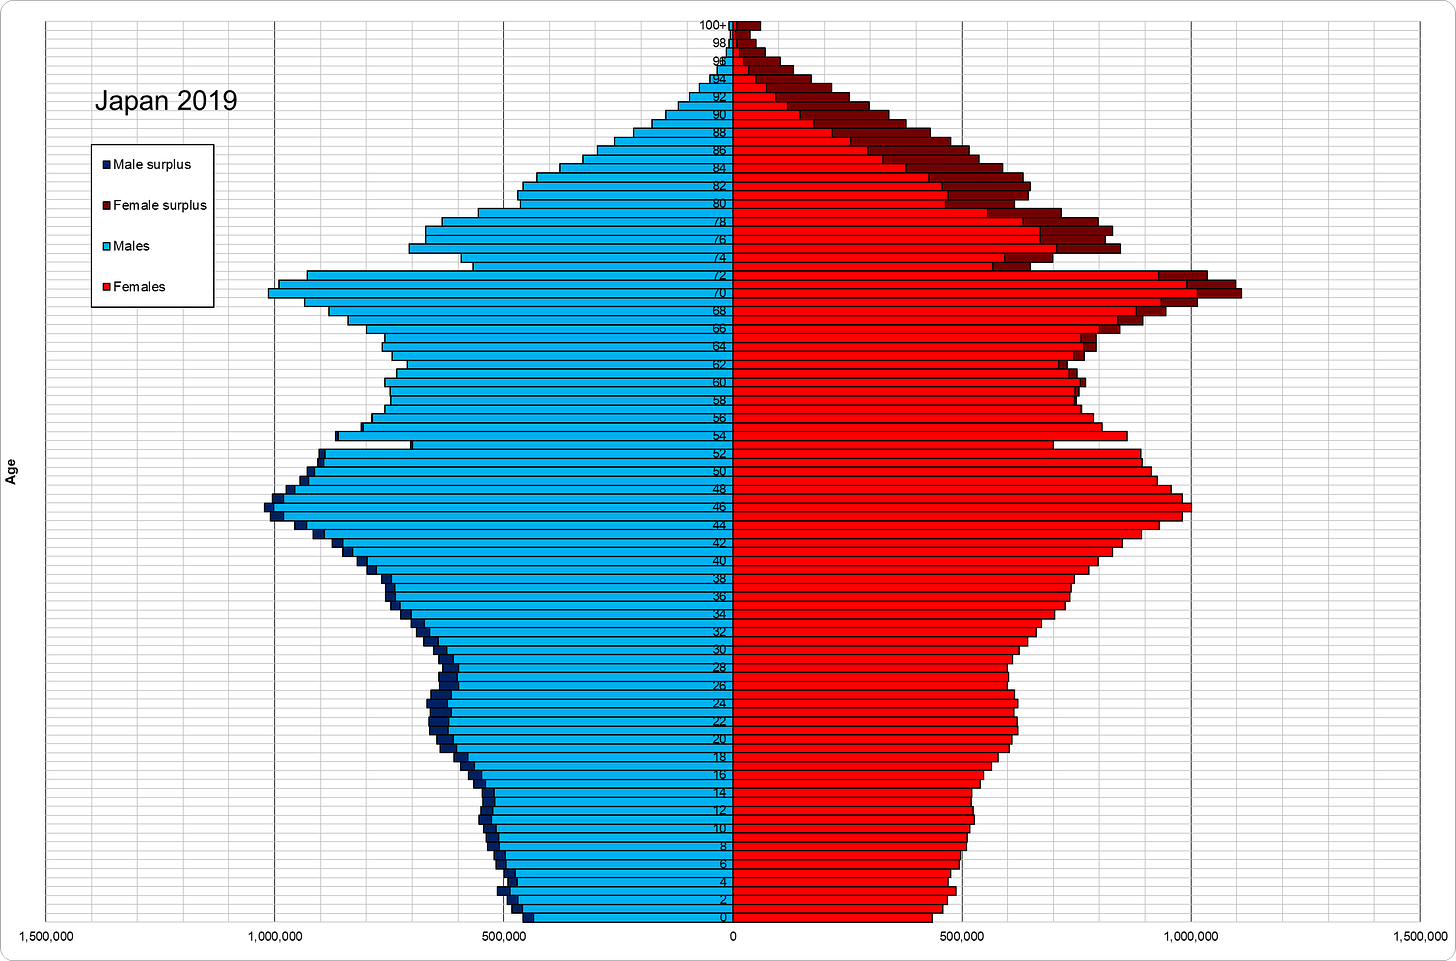 The Ageing of Japan (population pyramid)